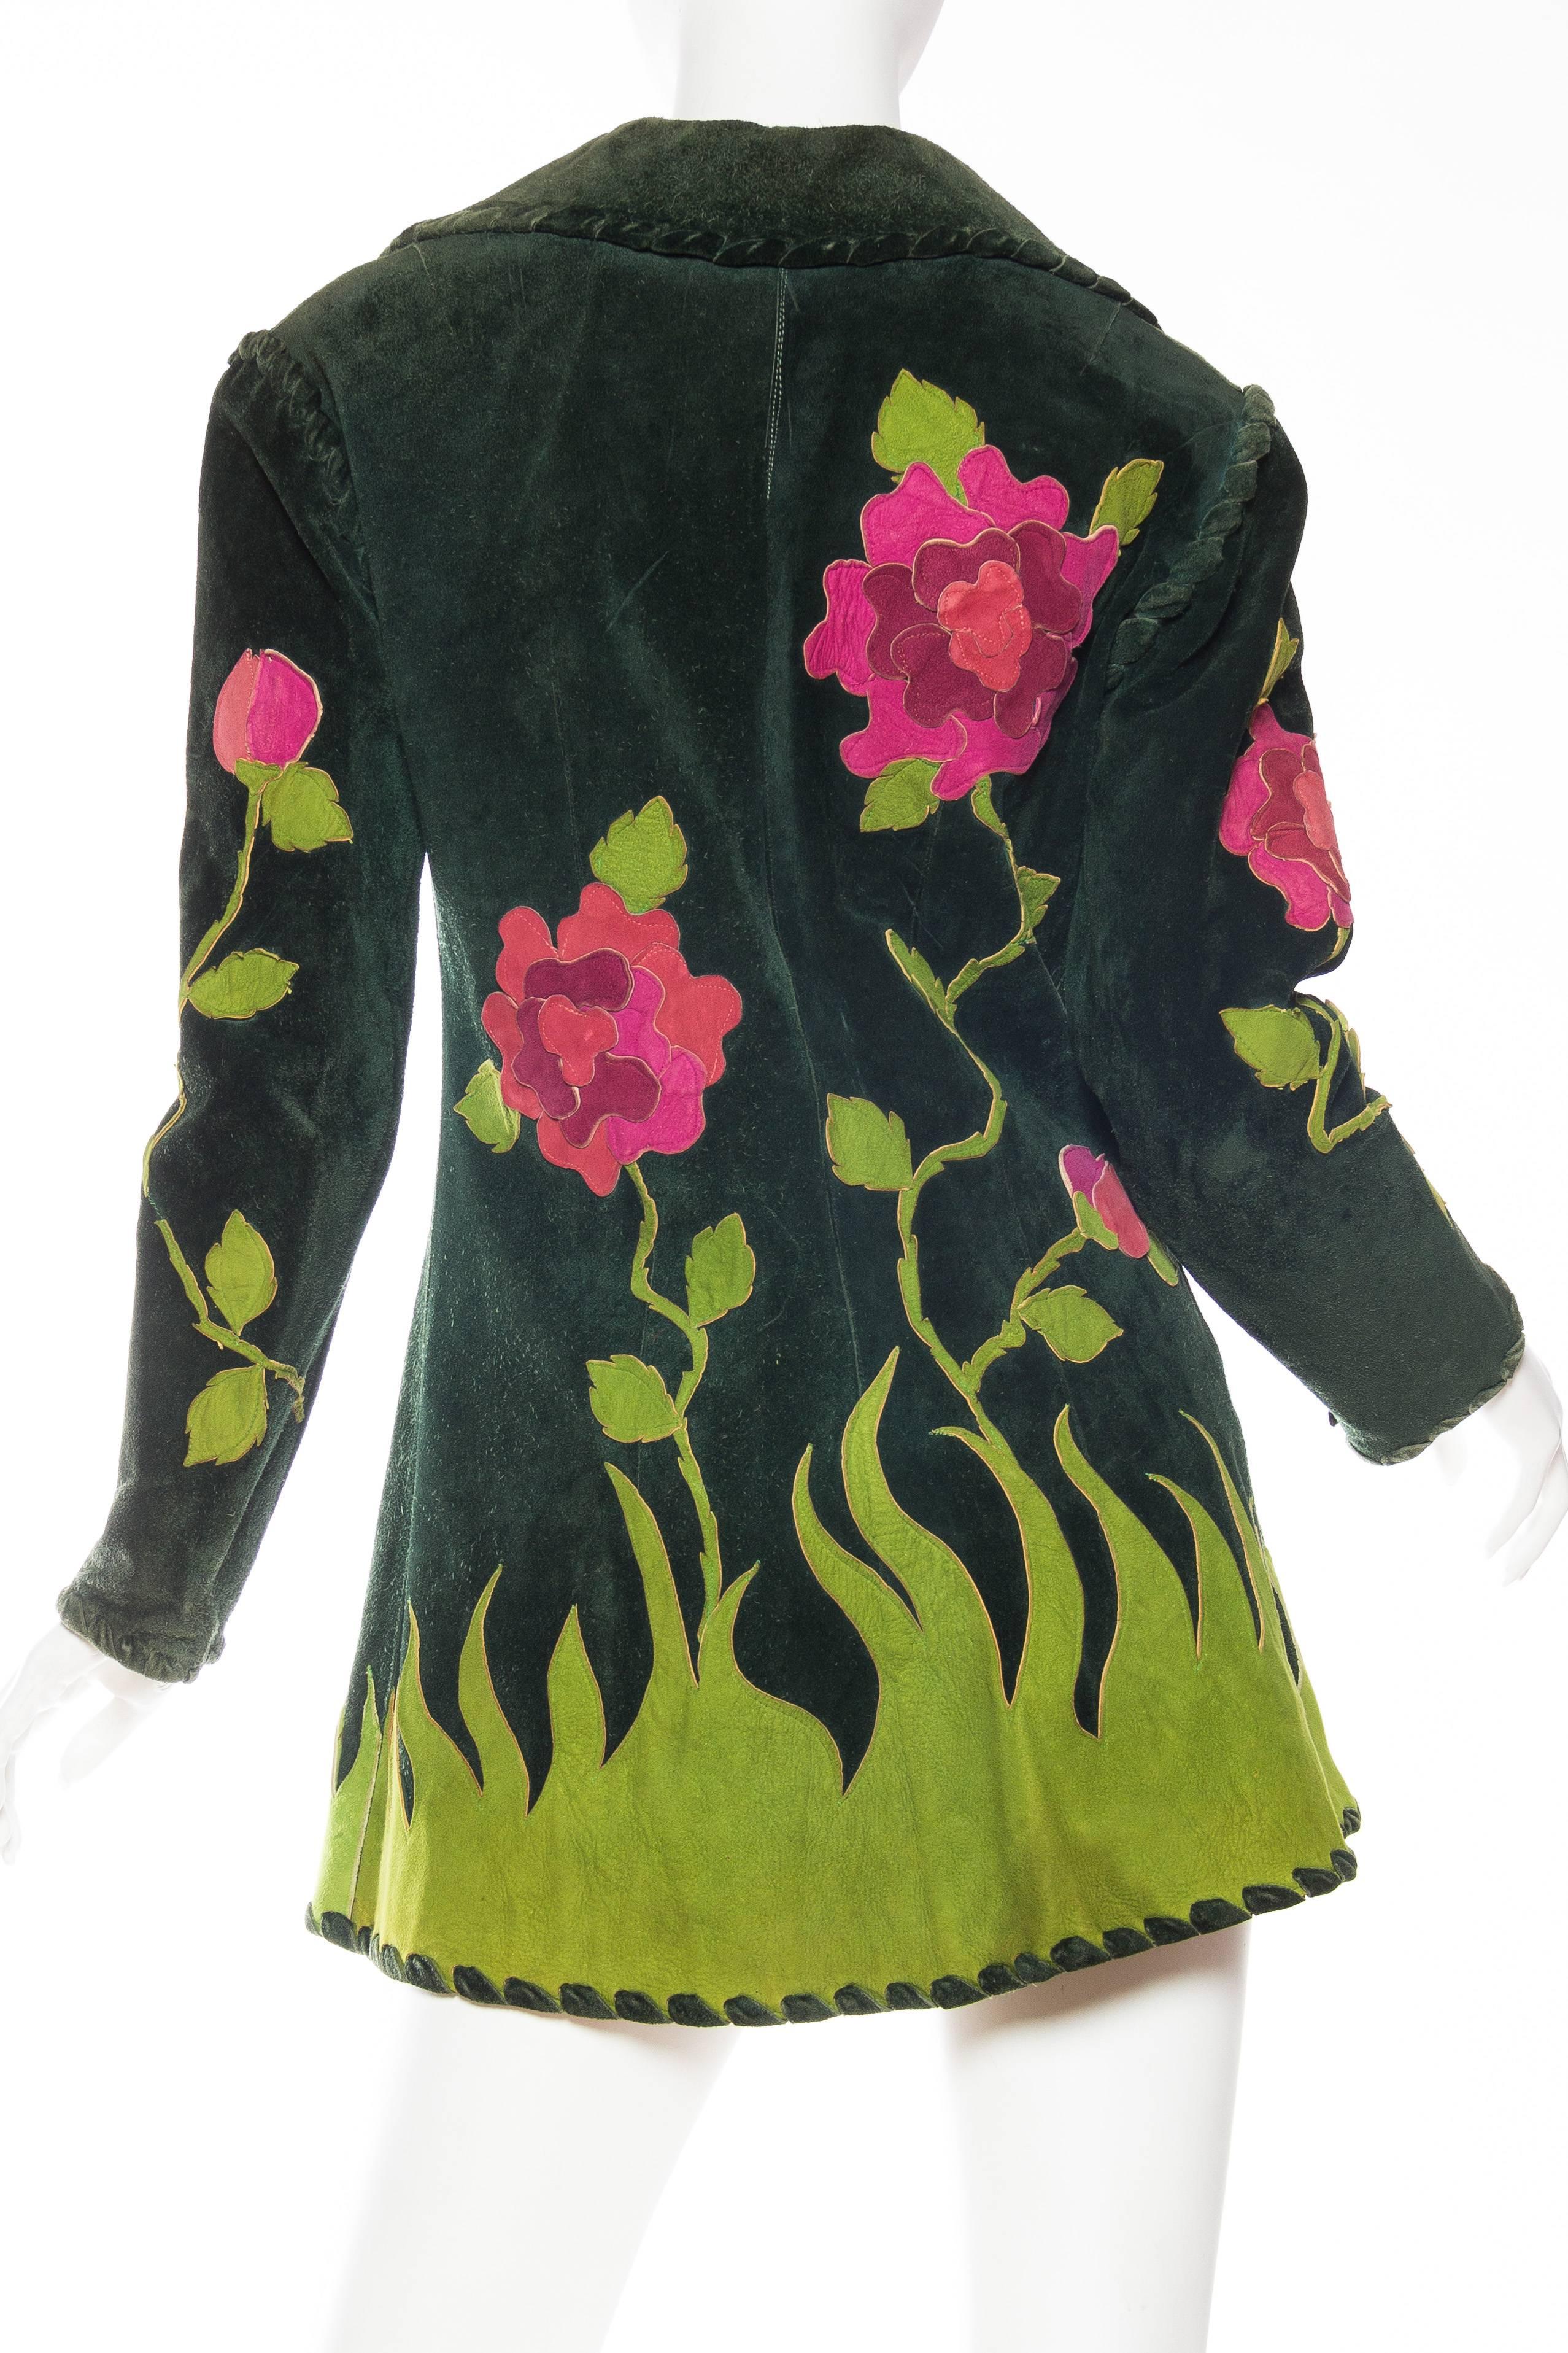 1960s  Gucci style 1970s Suede Jacket with Rose Appliques 1